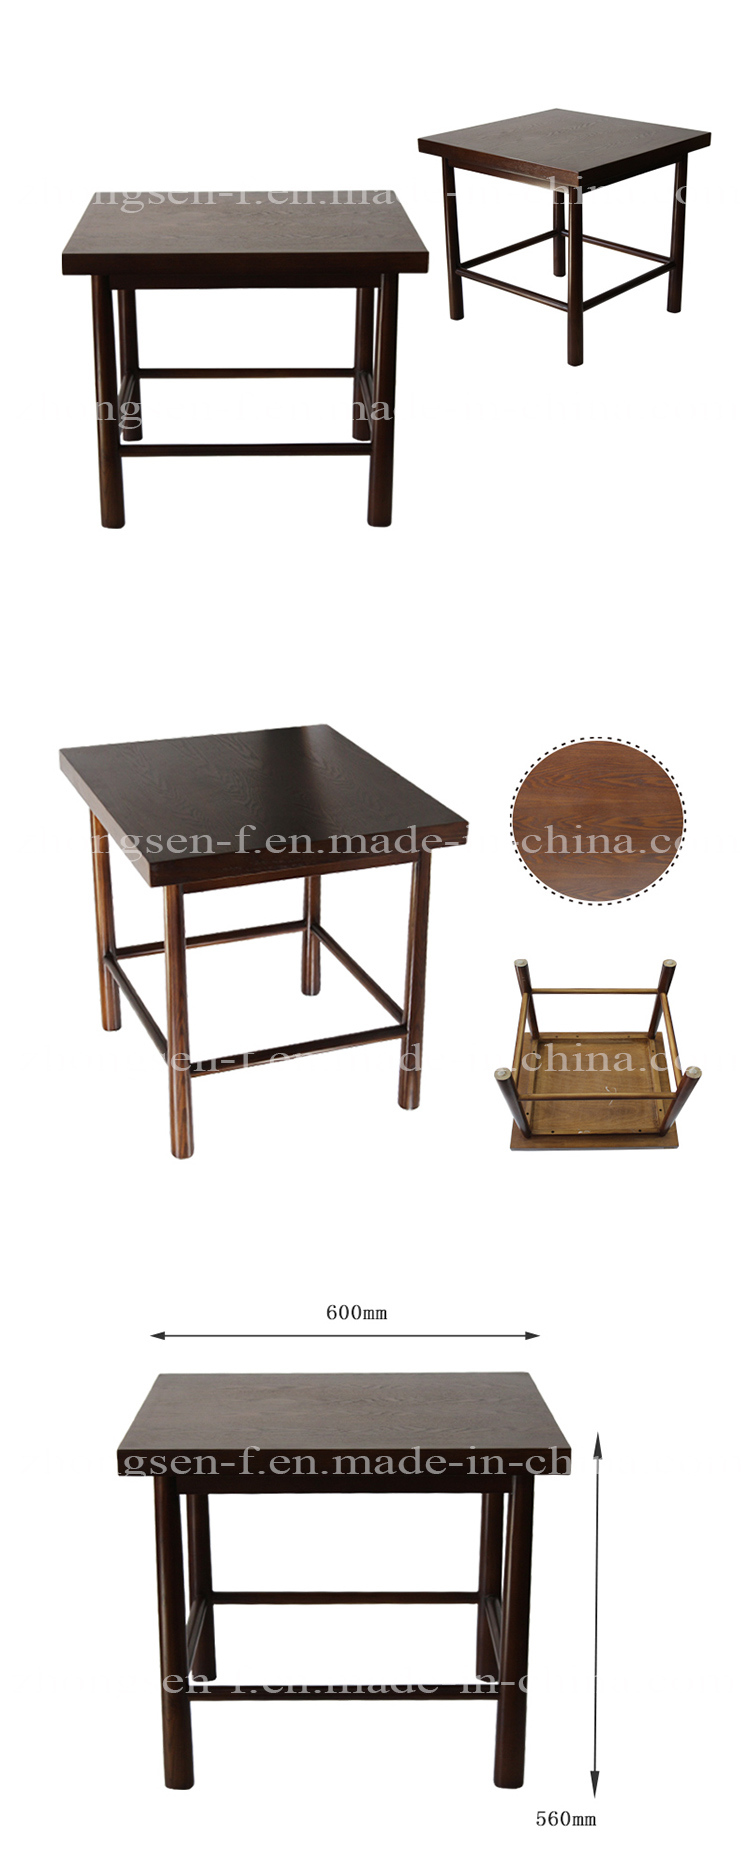 Solid Wood Furniture Square Table Dining Table Used on Restaurant